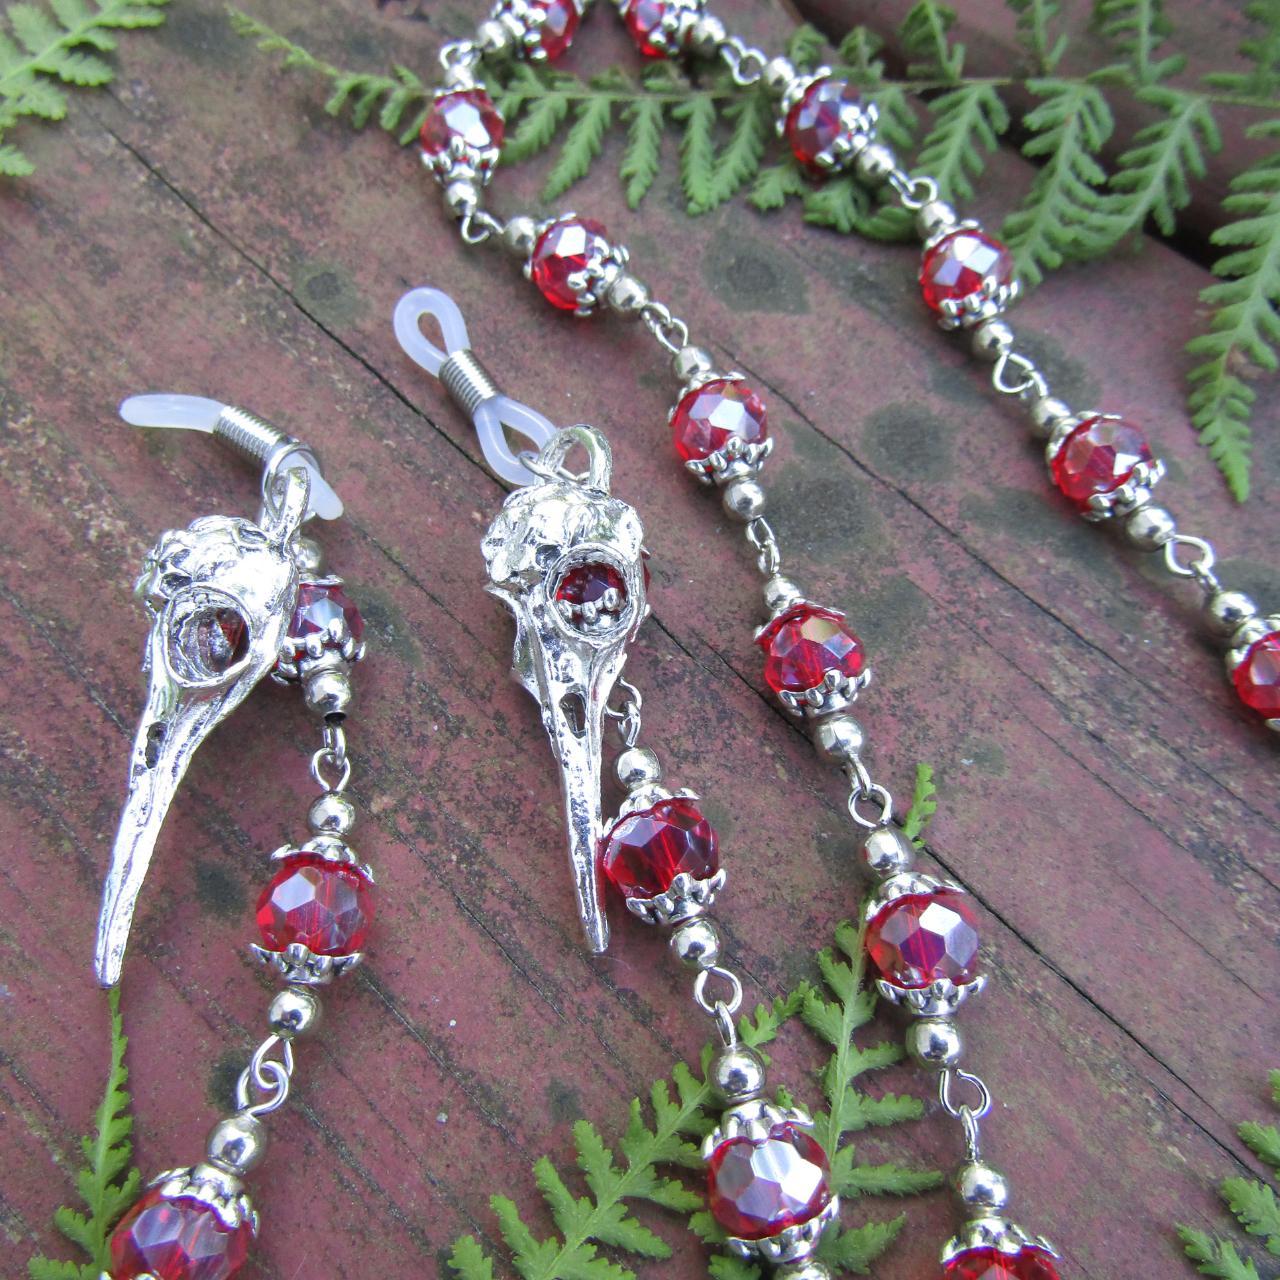 Witchy Glasses Chain, Goblincore Jewelry, Skull Bead Necklace for